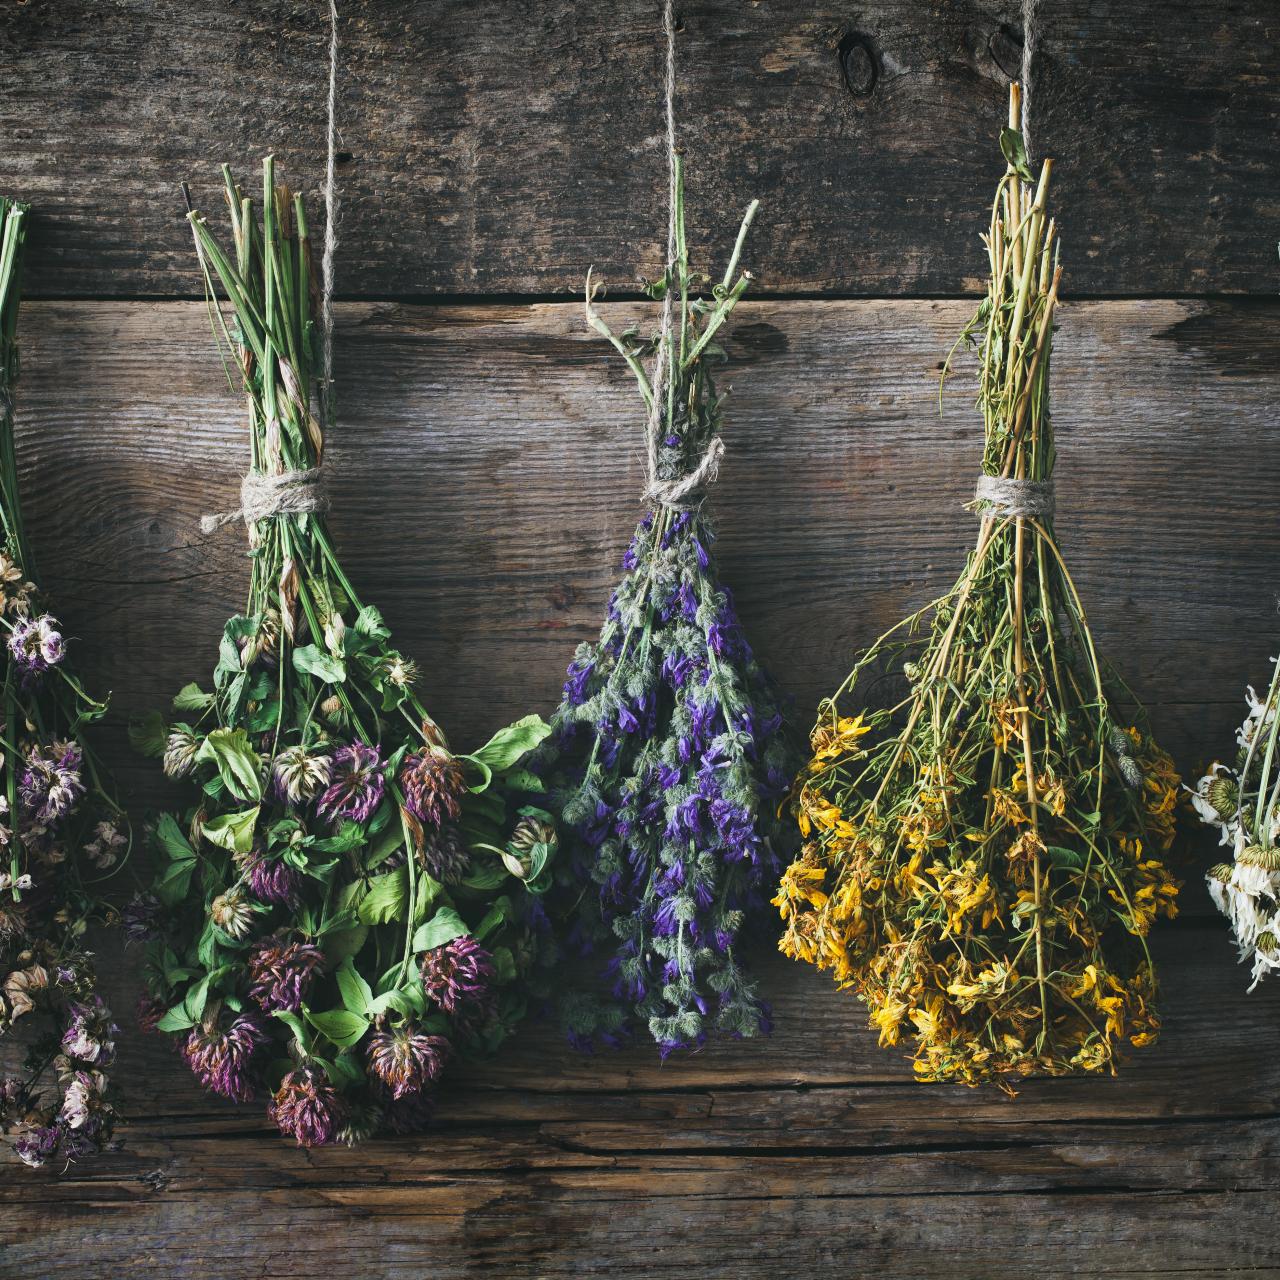 Dried Flower Art Allows You To Display Real Botanicals in Your Home